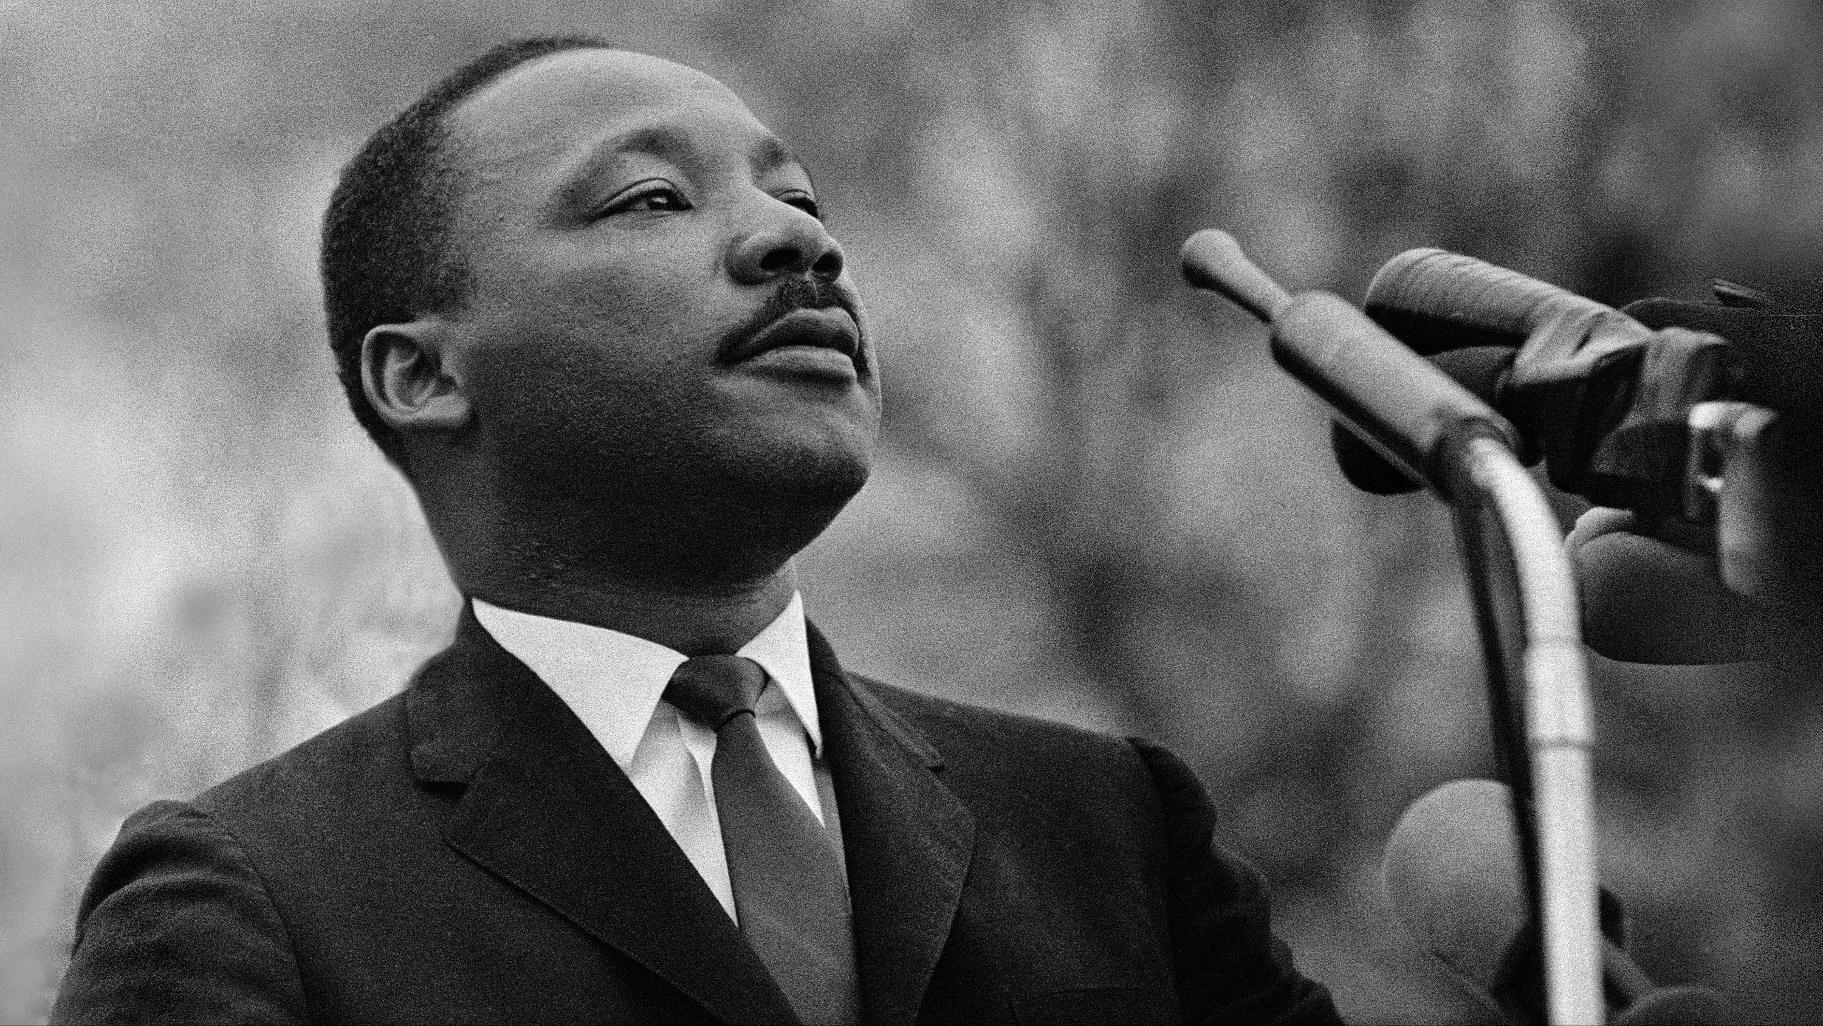 Dr. Martin Luther King Jr. delivering a speech in Montgomery, Alabama, on March 25, 1965. (Stephen F. Somerstein / Getty Images)